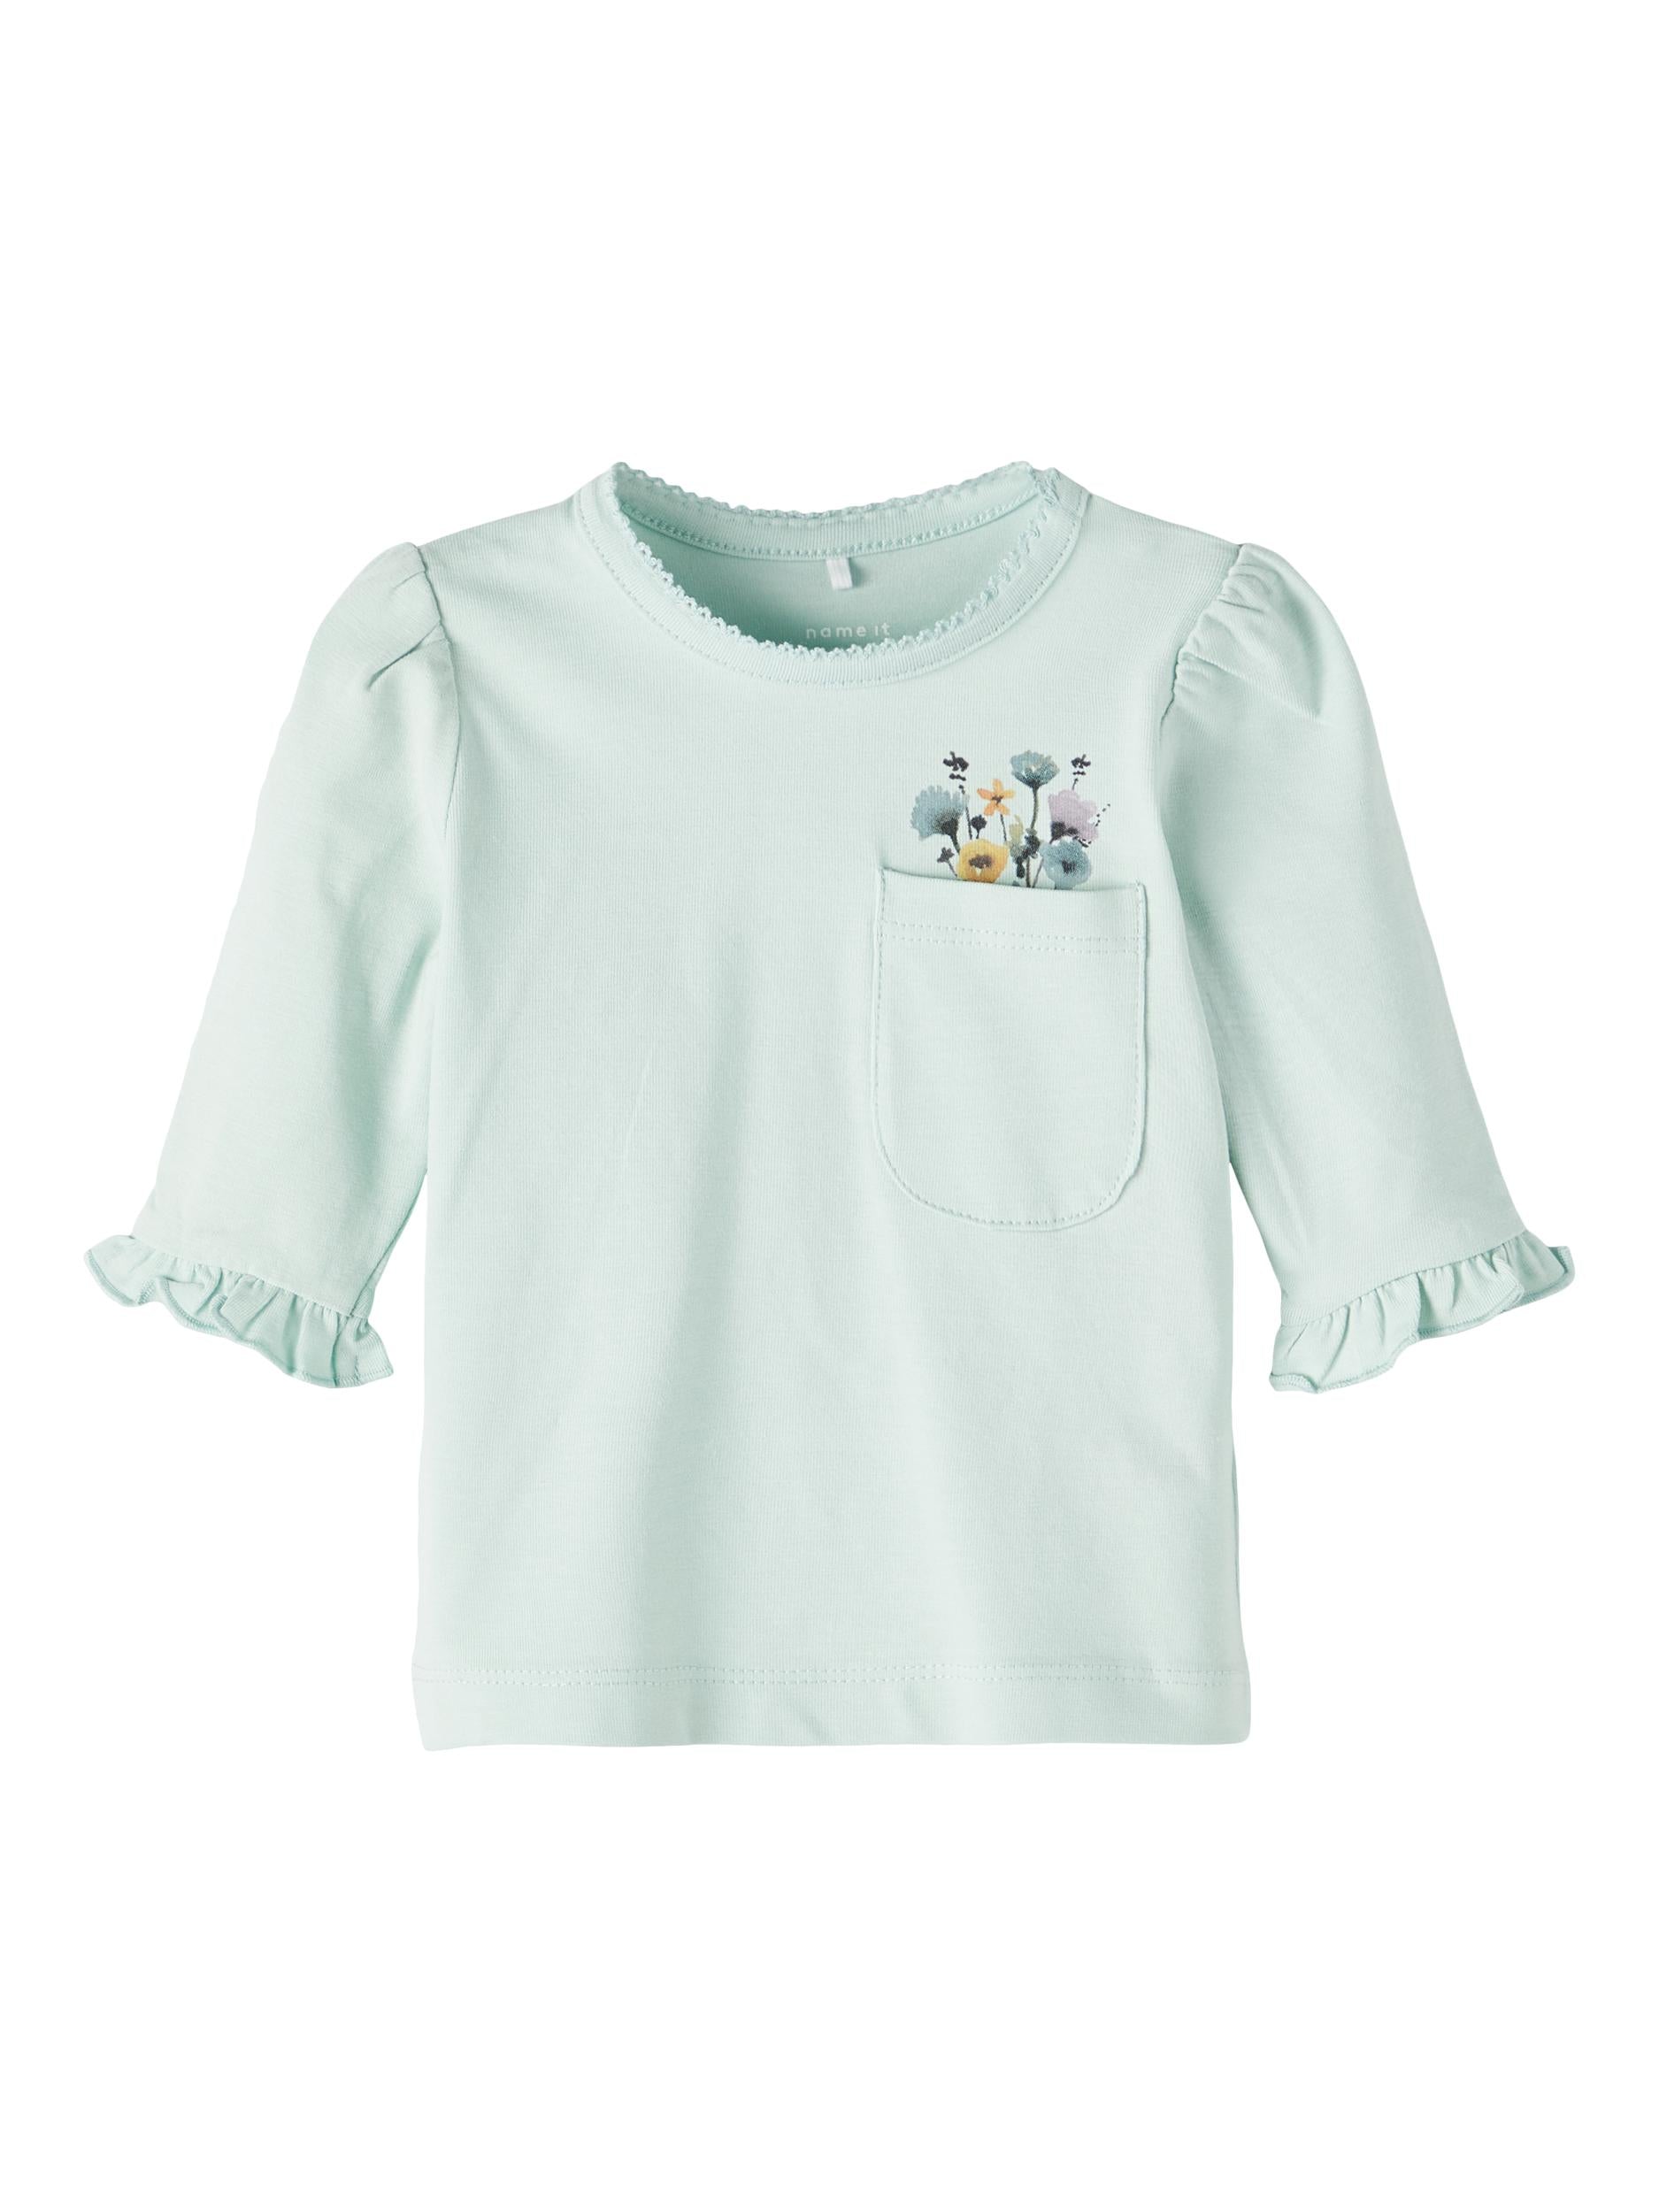 Girls Turquoise Risine Long Sleeve Top-Front View